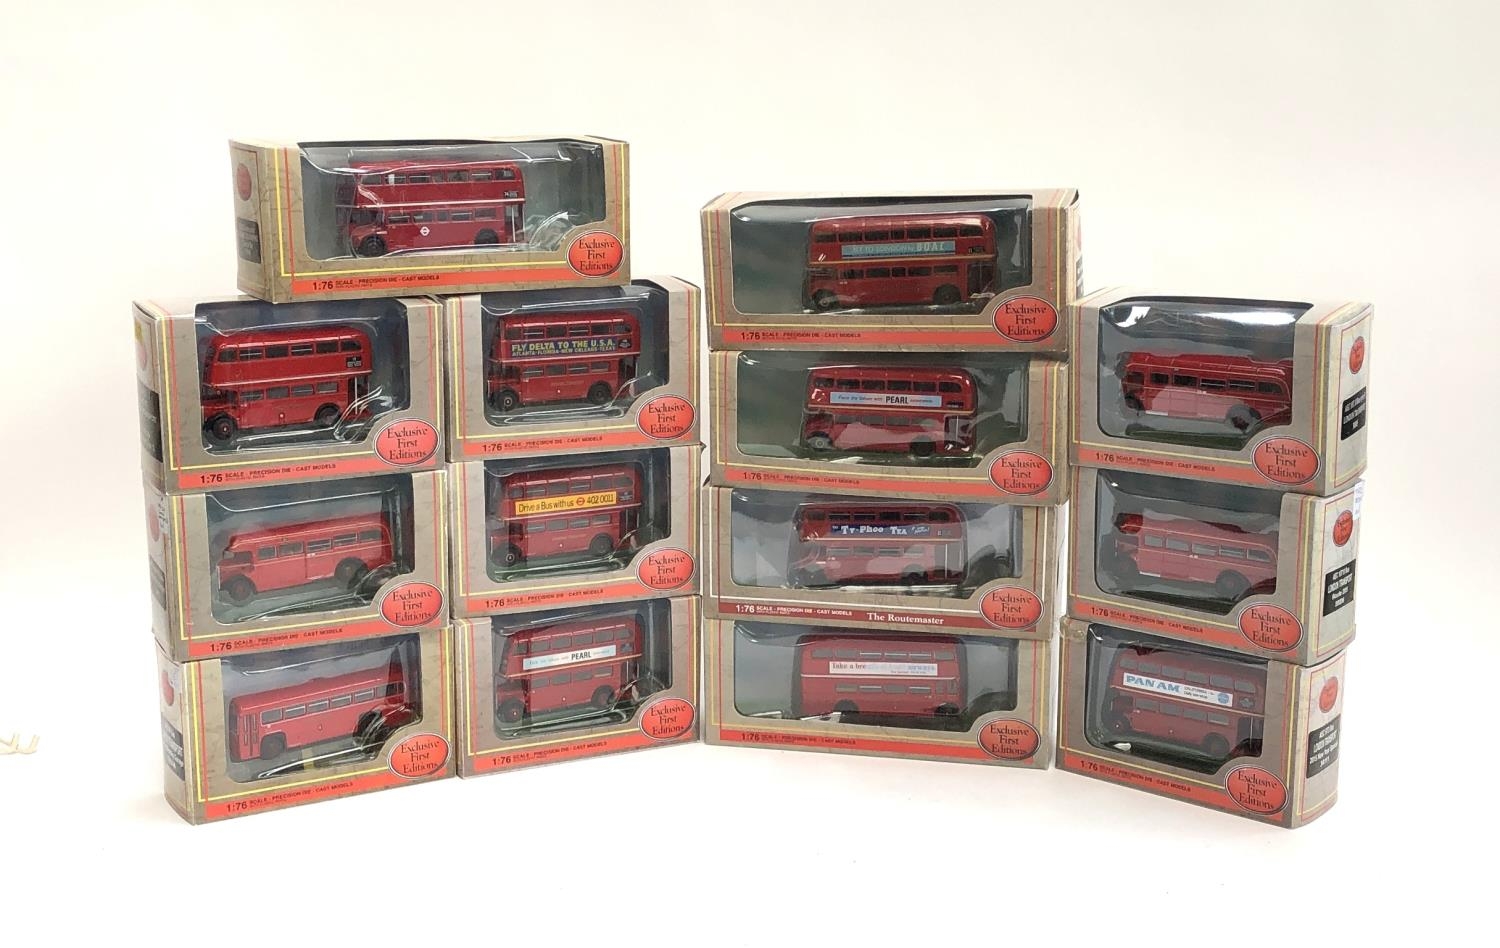 Fourteen Exclusive First Editions 1:76 scale London Transport double and single decker buses, in red